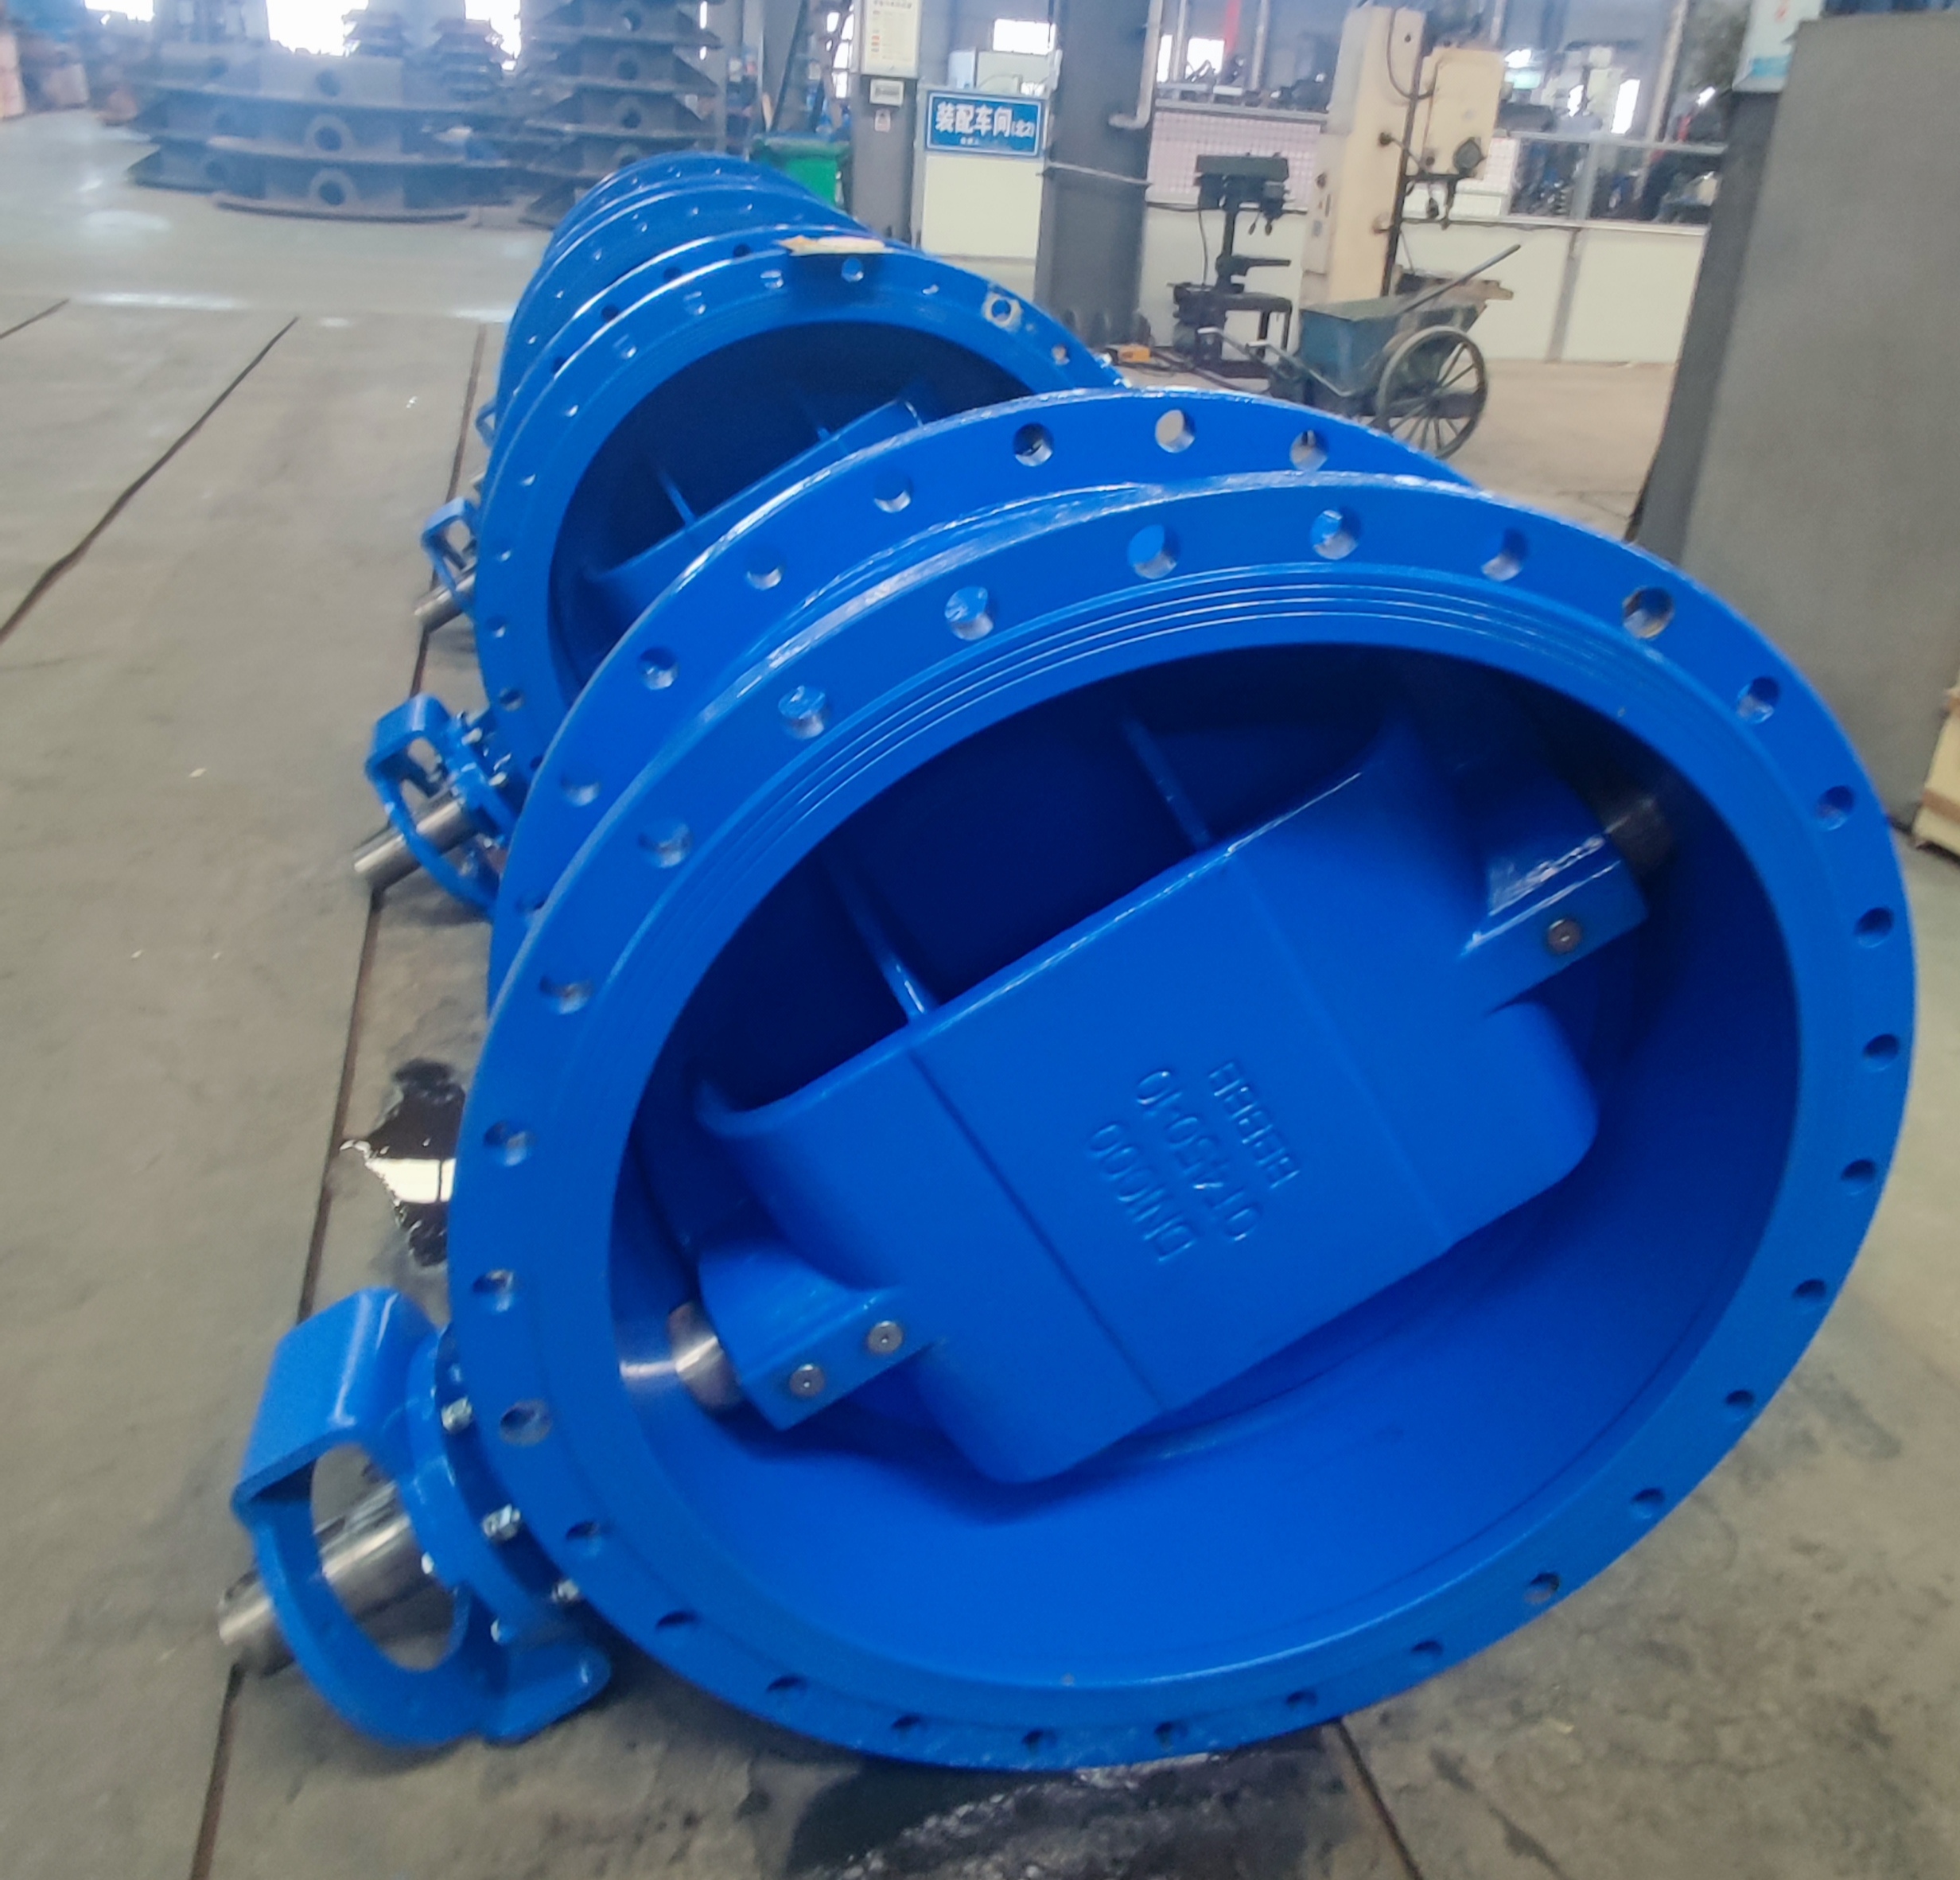 The application prospects of double eccentric butterfly valves in Europe